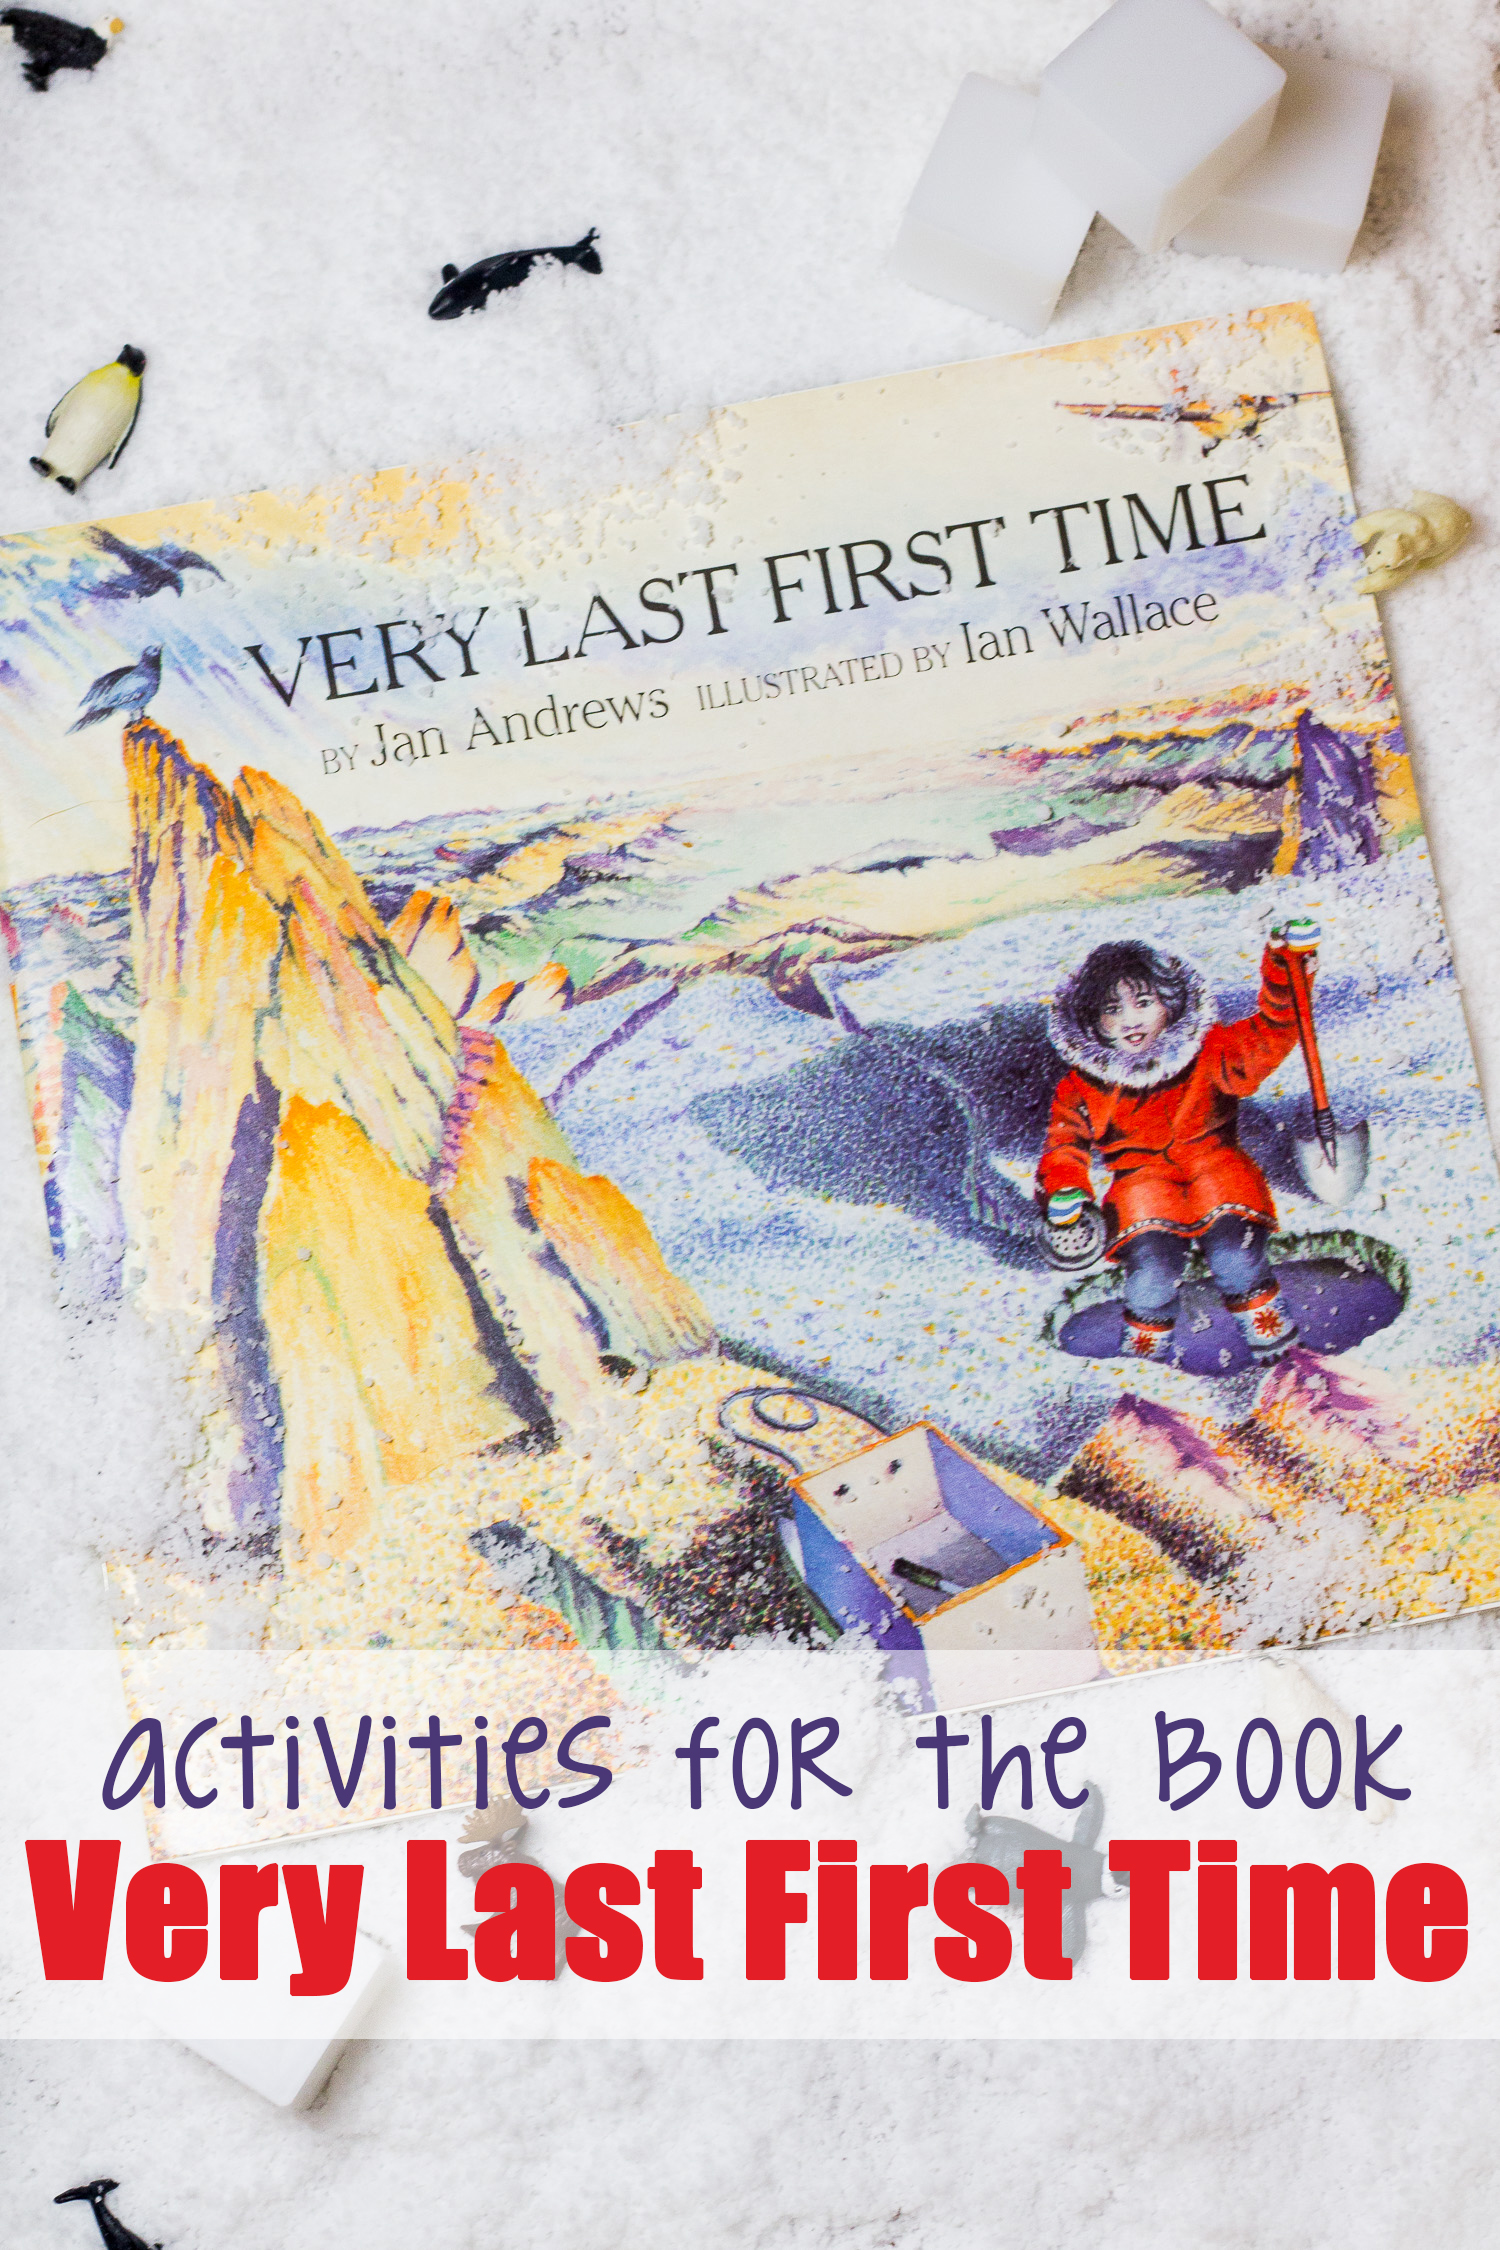 What was your Very Last First Time? We all experience important “lasts.” Our last first day of school, our last first time going to the dentist, and more. In the book, the main character experiences her very last first time doing something alone-- going and collecting mussels off of the sea bed. Whether you are rowing the book or just enjoying reading it with your kids, here are some extension activities for the book Very Last First Time. | Five in a Row | FIAR | Homeschooling | Unit Study | Hands-On Learning | Play to Learn | Kindergarten | Arctic Homeschooling Activities | Tundry Homeschooling Activities | Books to Go Along With Very Last First Time |